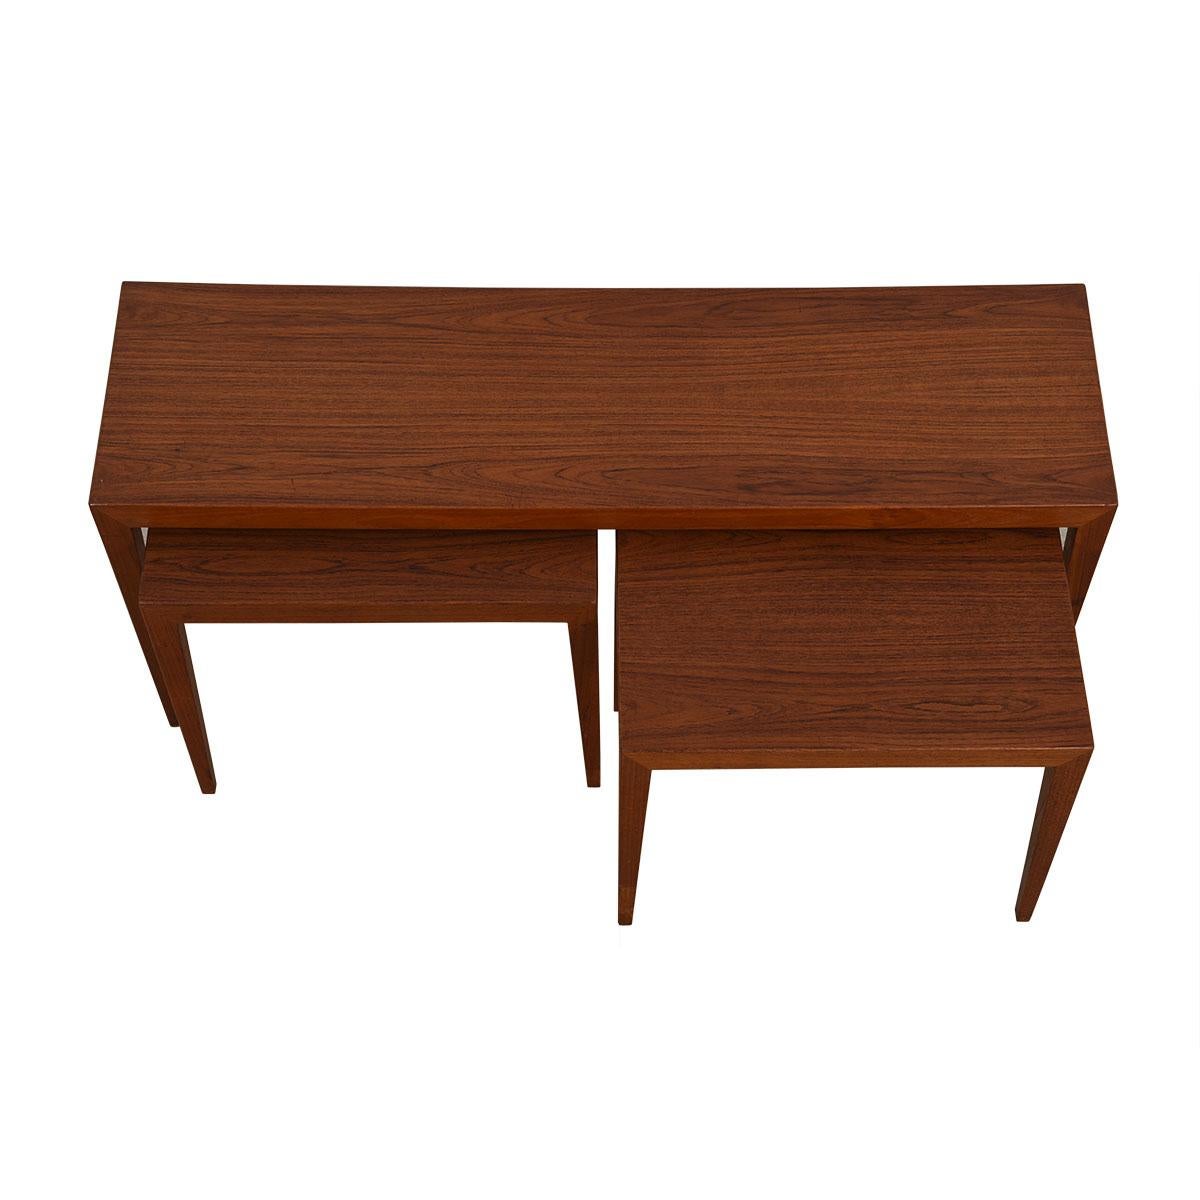 Rare Danish Teak Skinny Accent / Coffee Table with Pair Nesting Tables In Excellent Condition For Sale In Kensington, MD